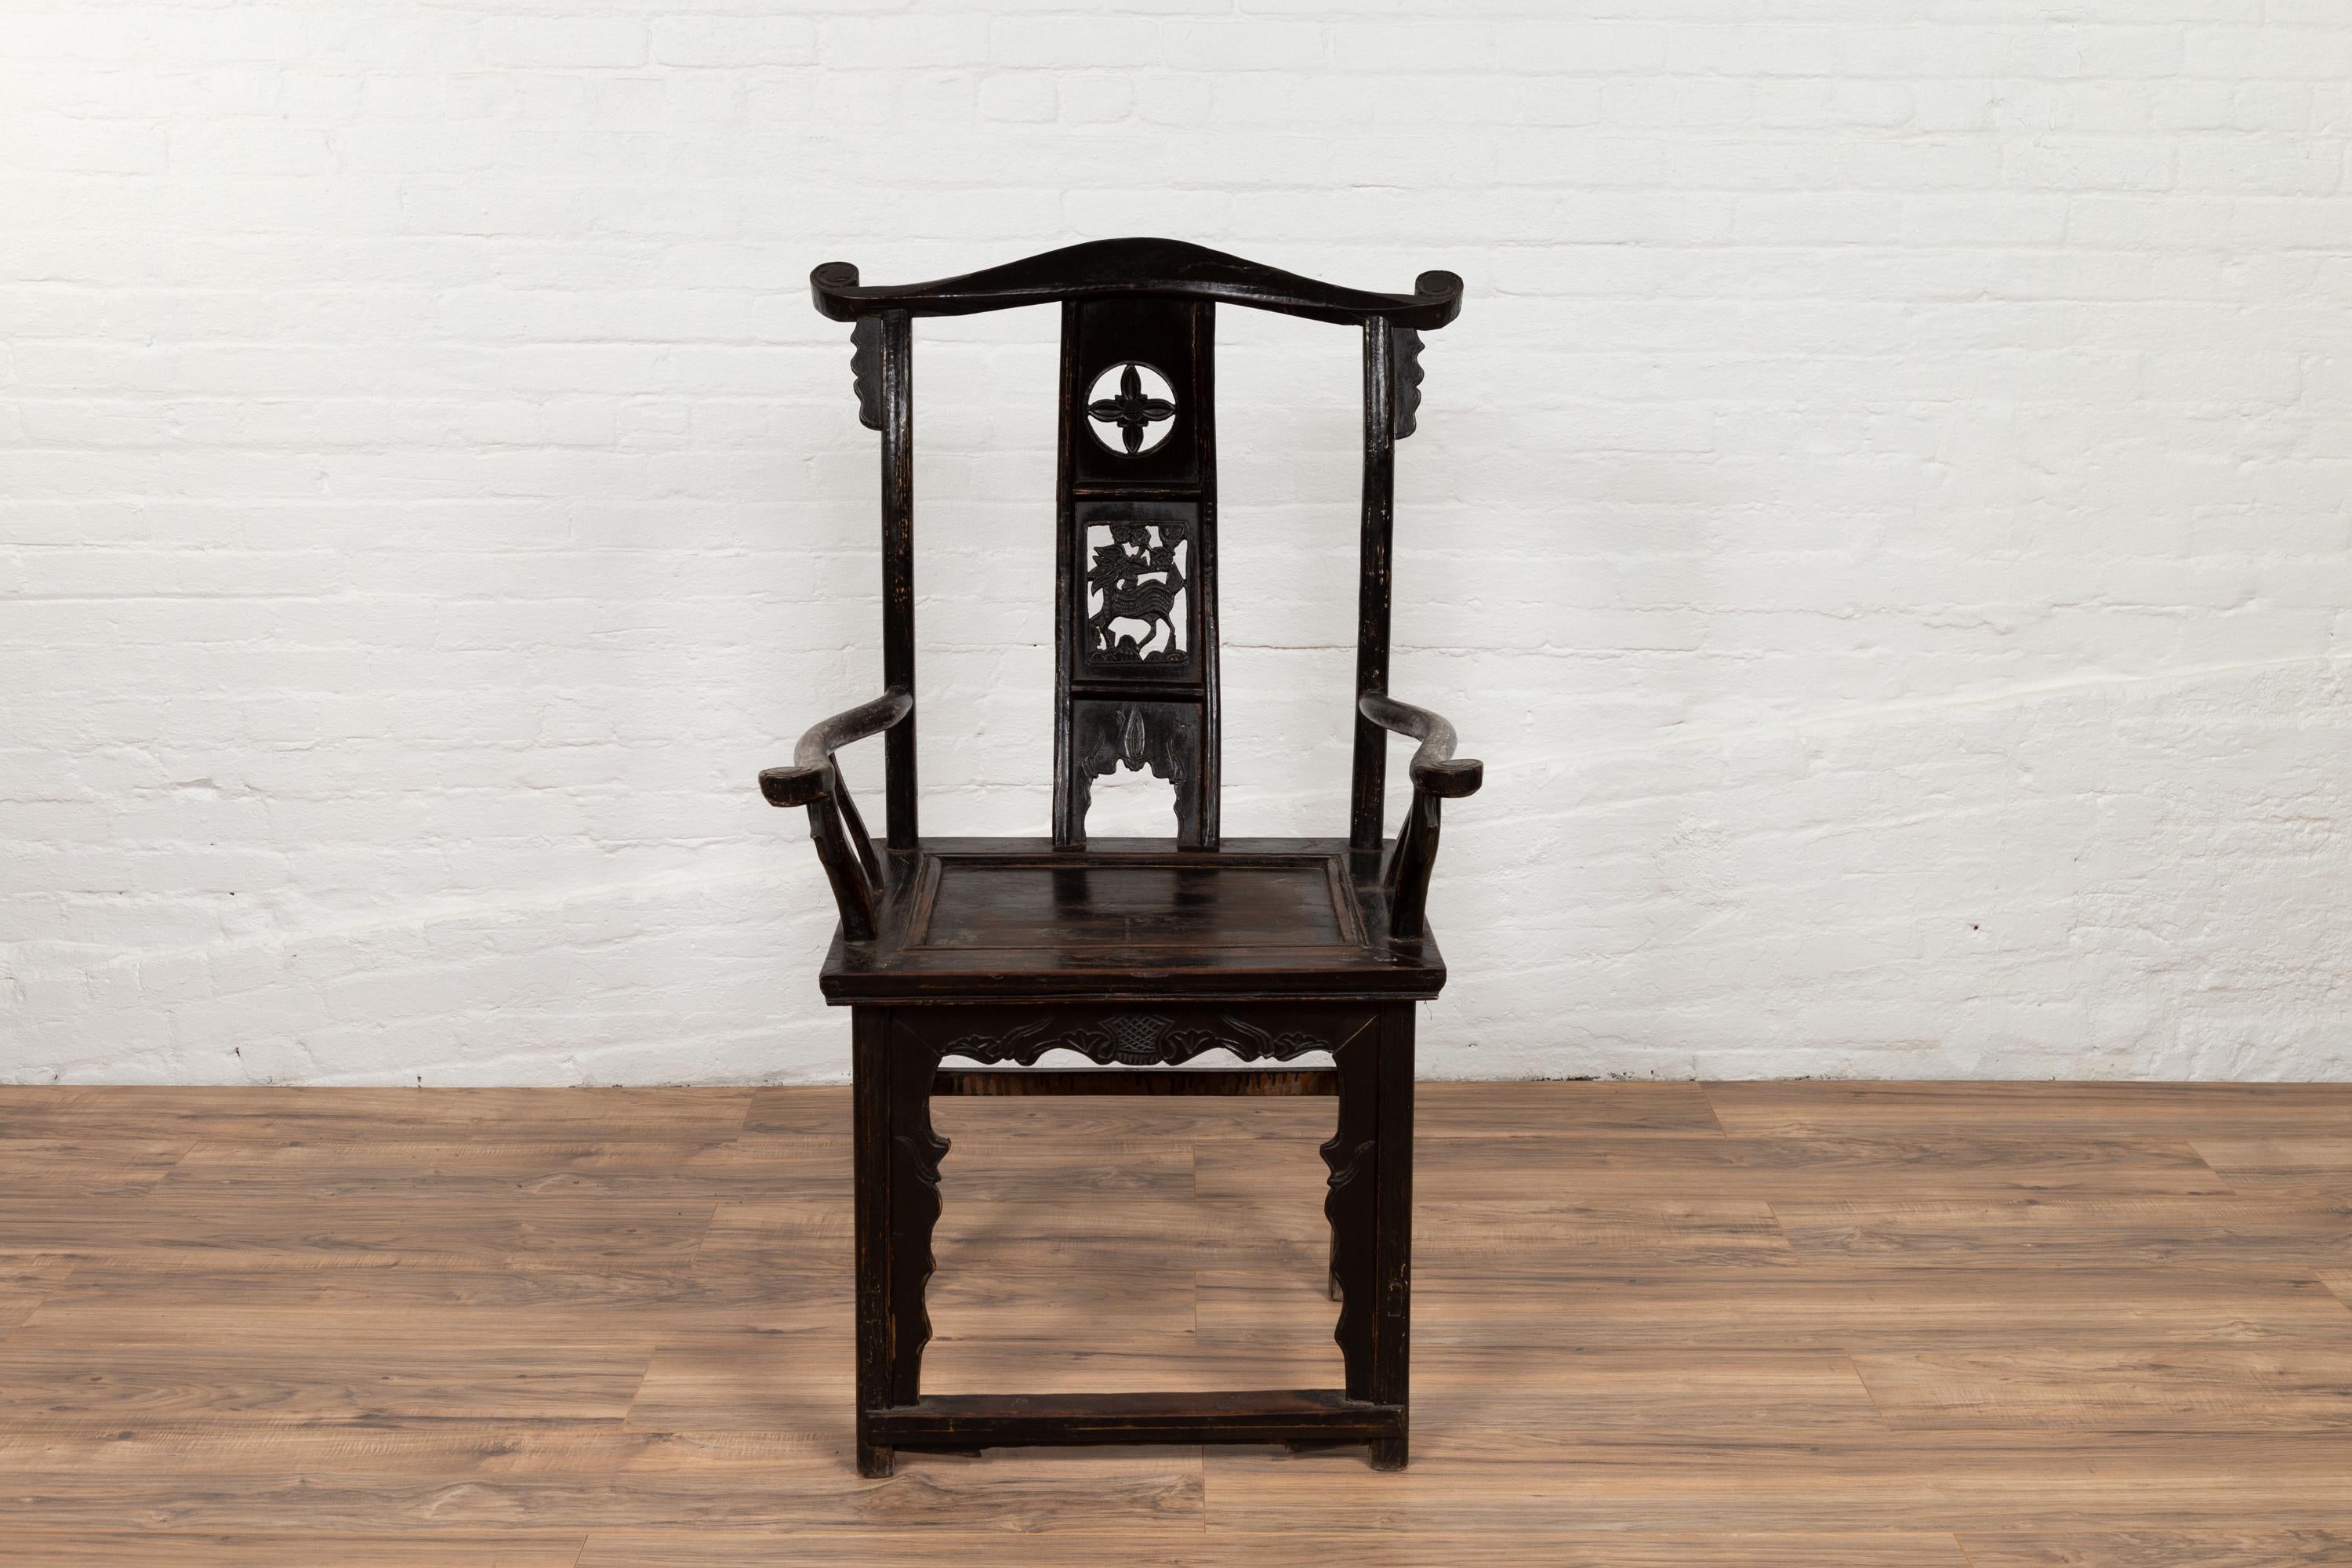 A Chinese elmwood scholar's lamp-hanger armchair from the late 19th century, with carved splat, dark patina, curving arms and side stretchers. Born in China in the later years of the 19th century, this scholar's lamp-hanger chair called dengguayi